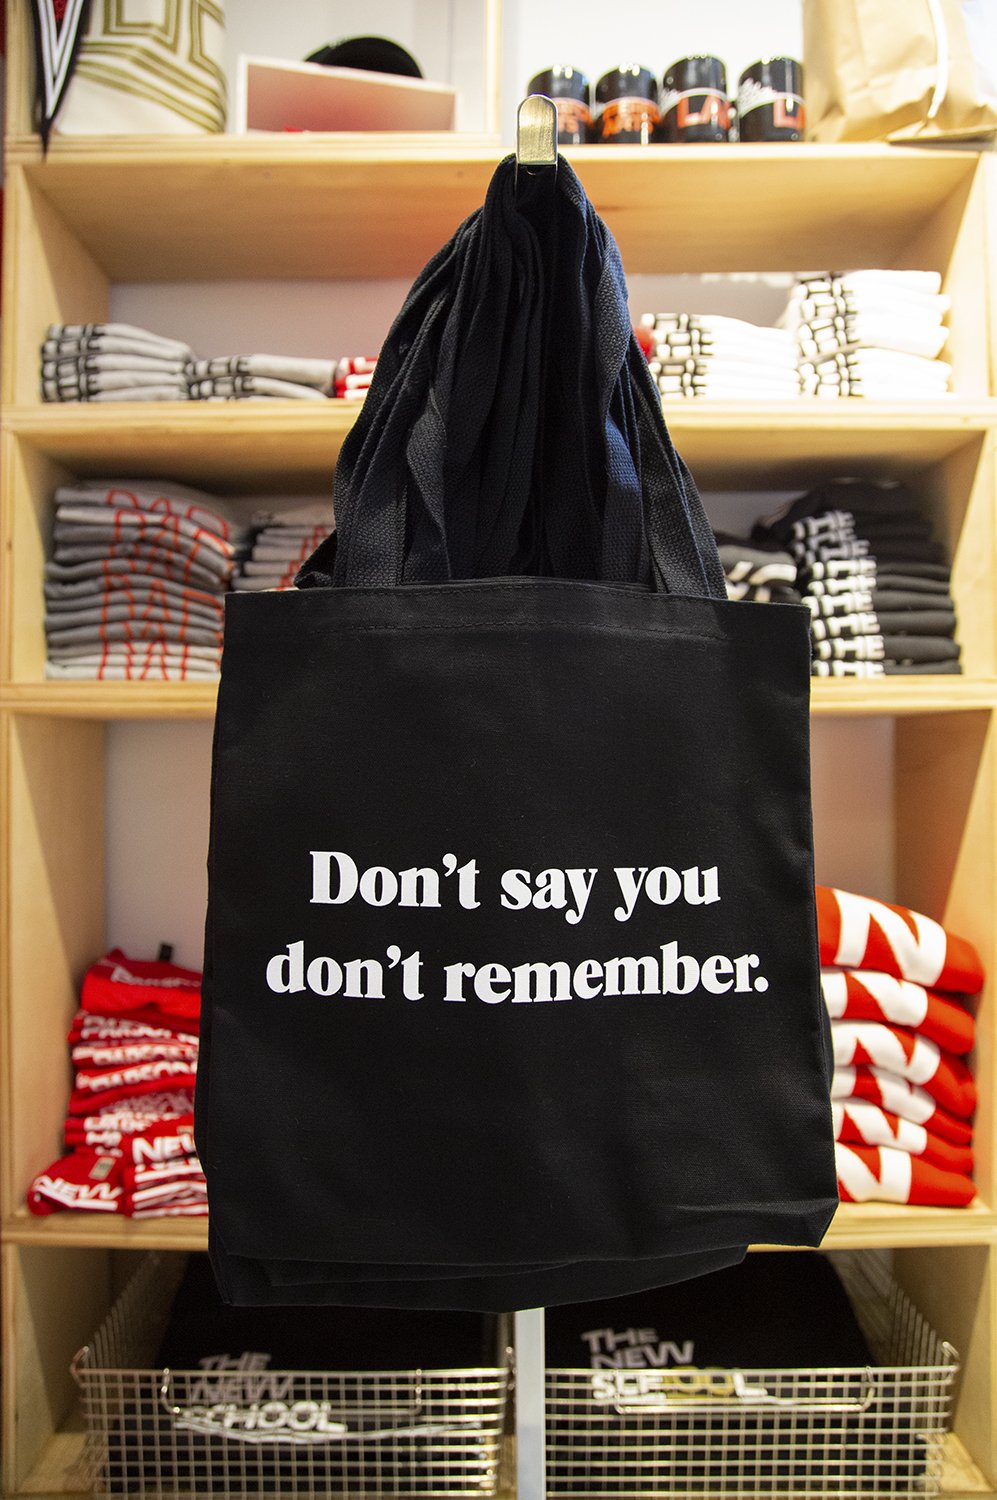   Rec-elections (Don’t say you don’t remember.),  2019 silk-screened tote bag 13 x 13.75 inches Installation view,  The Historical Present , The New School, NY, NY 